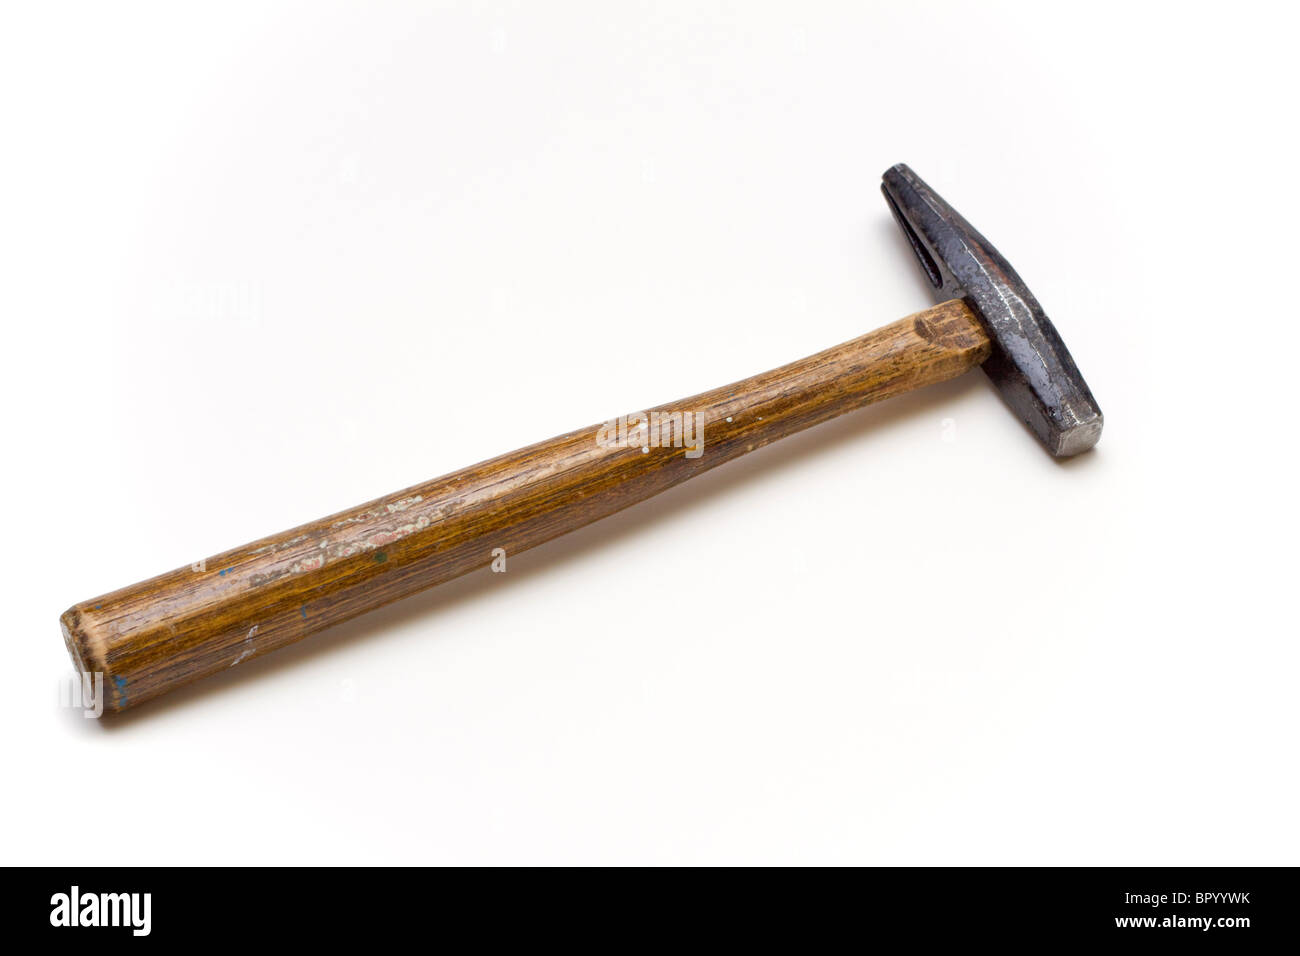 Small hammer with an old fashioned wooden handle Stock Photo